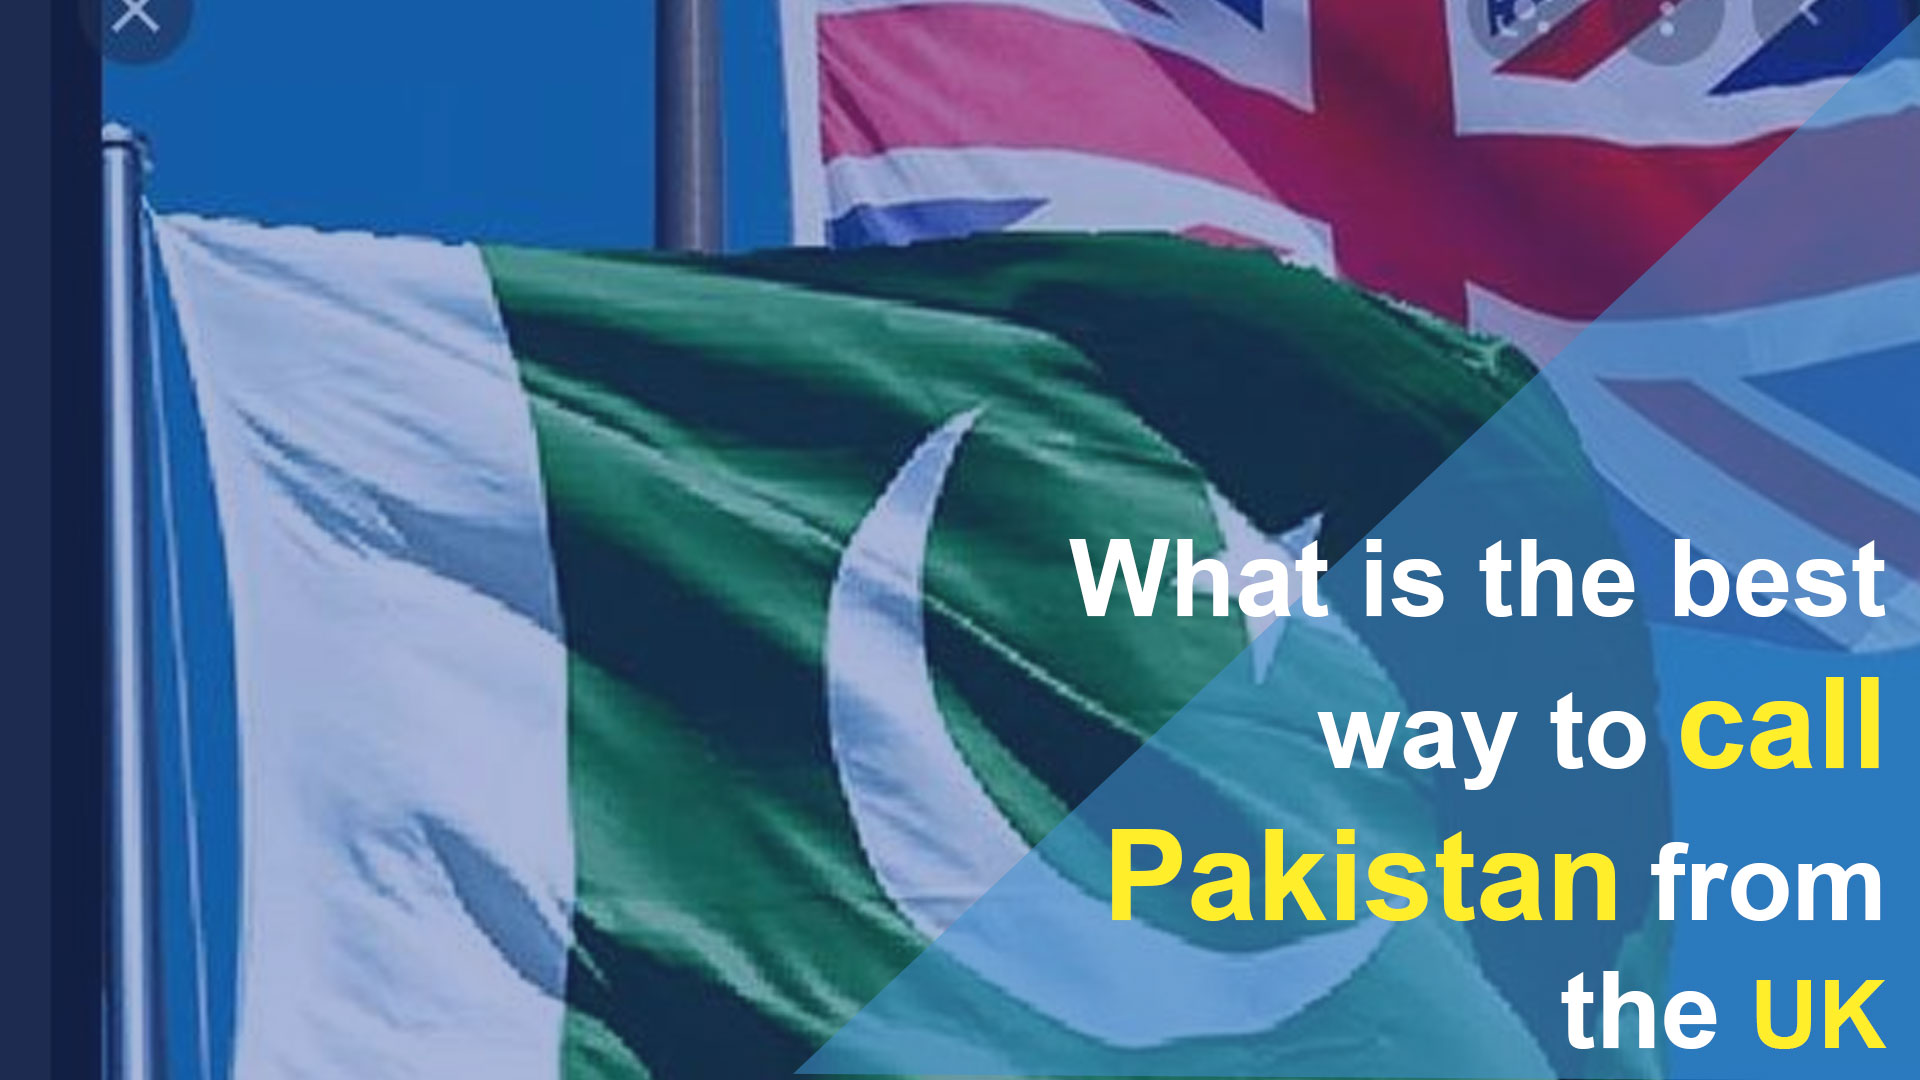 What is the best way to call Pakistan from the UK